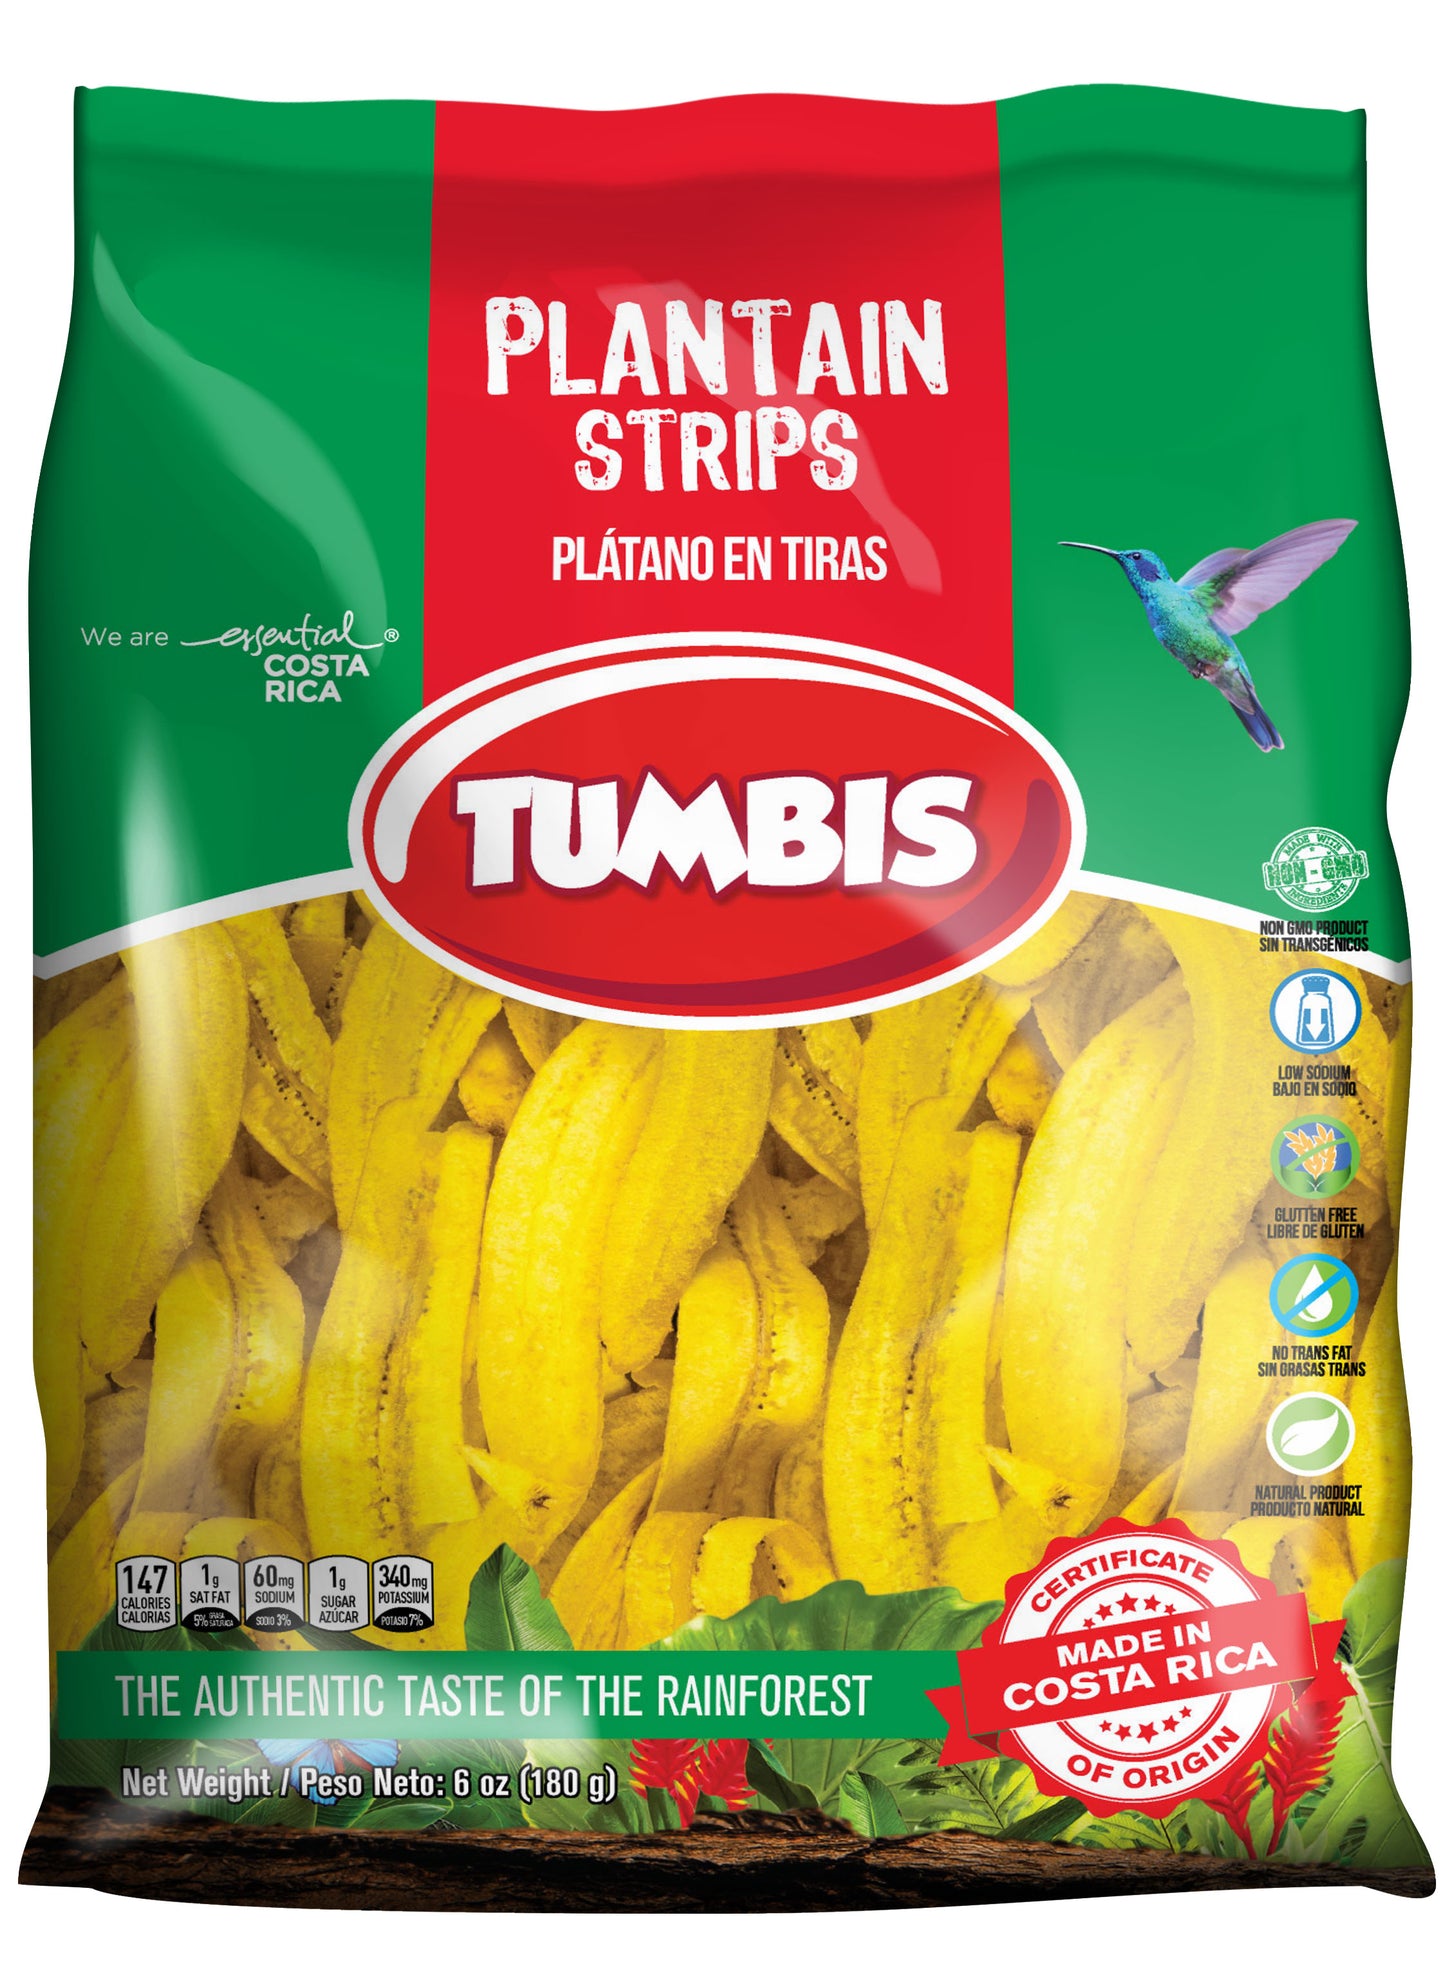 Green Plantain Strips by Tumbis - Costa Rica